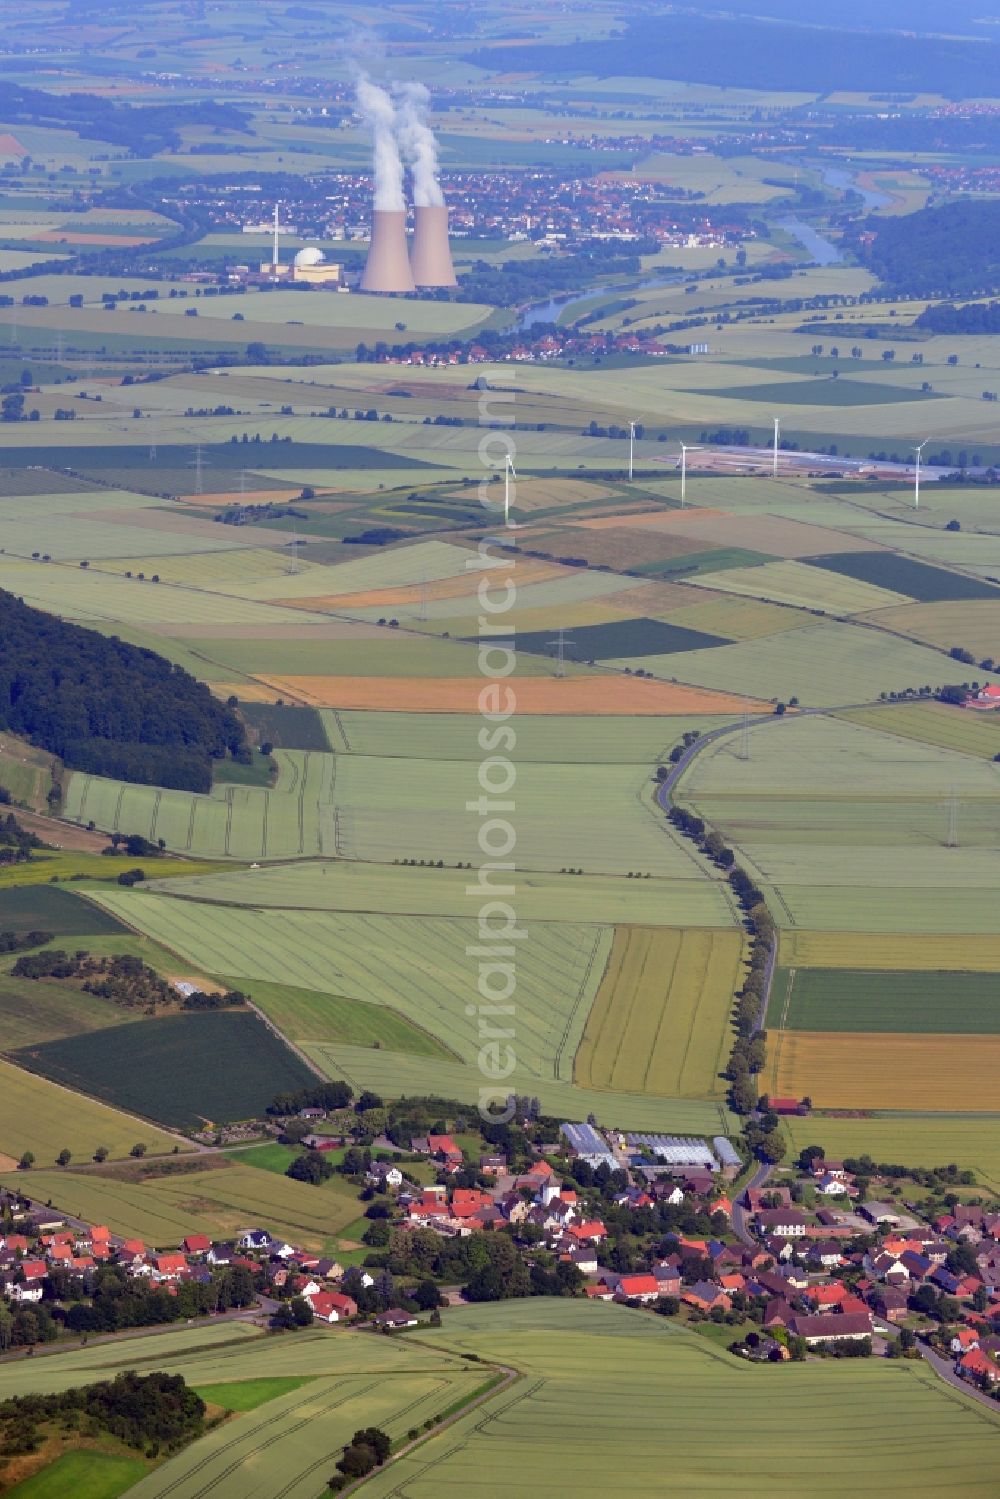 Heyen / Grohnde from the bird's eye view: Landscape view of the Weser Valley. In the foreground is the town of Heyen, in the background is the Nuclear power plant Grohnde in the state of Lower Saxony. The plant has a pressurized water reactor and is located at the river Weser in the county district of Hameln - Pyrmont. The here produced power is fed into the high-voltage network